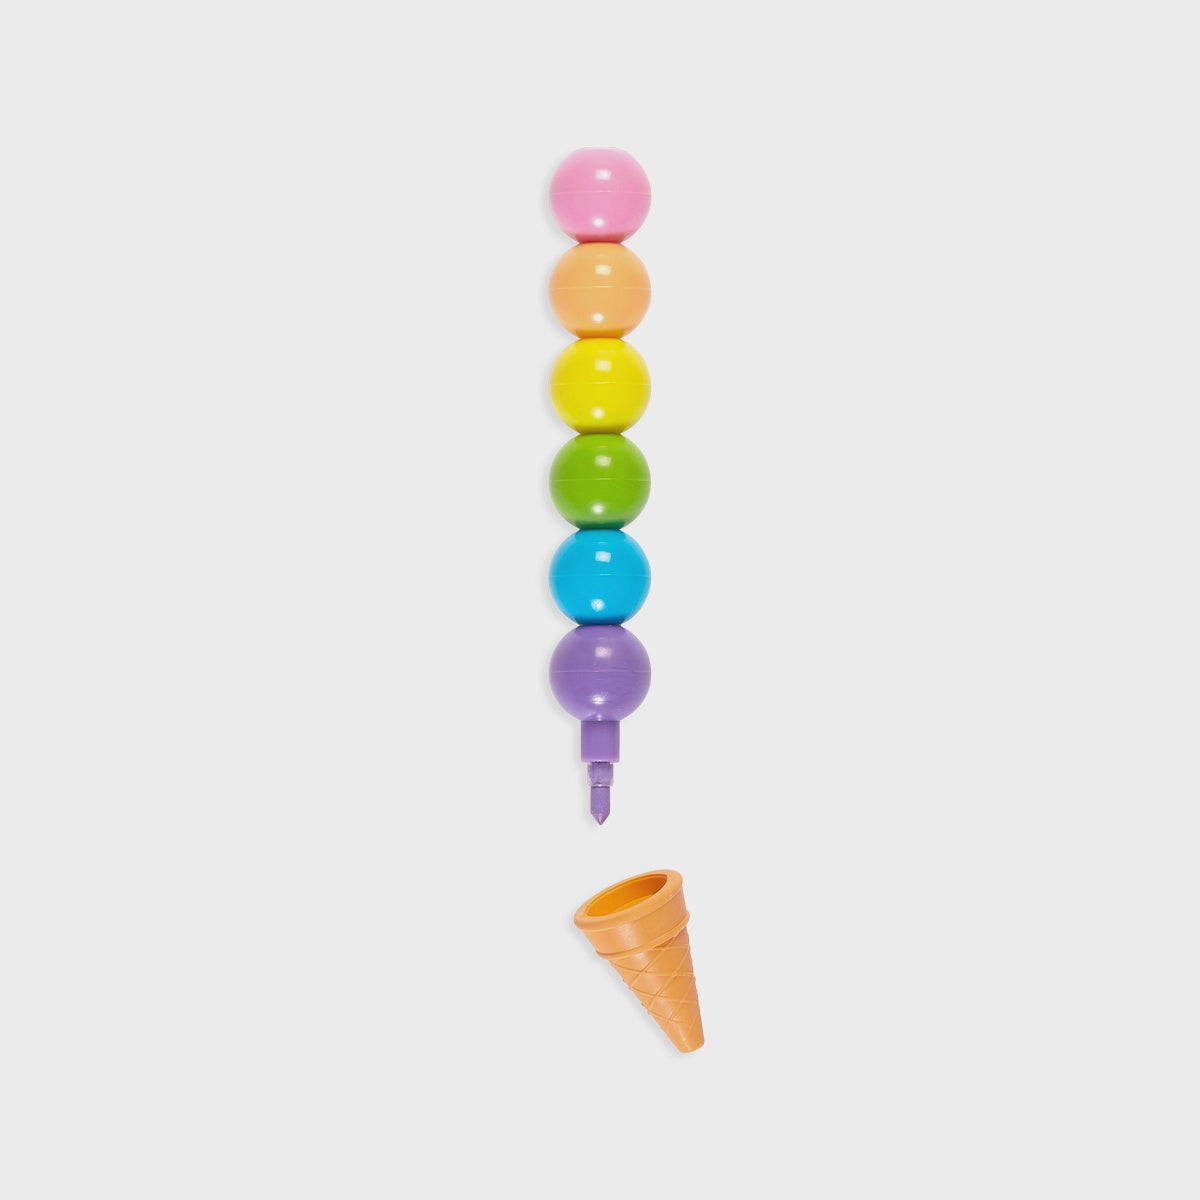 Heart to Heart Stacking Crayons